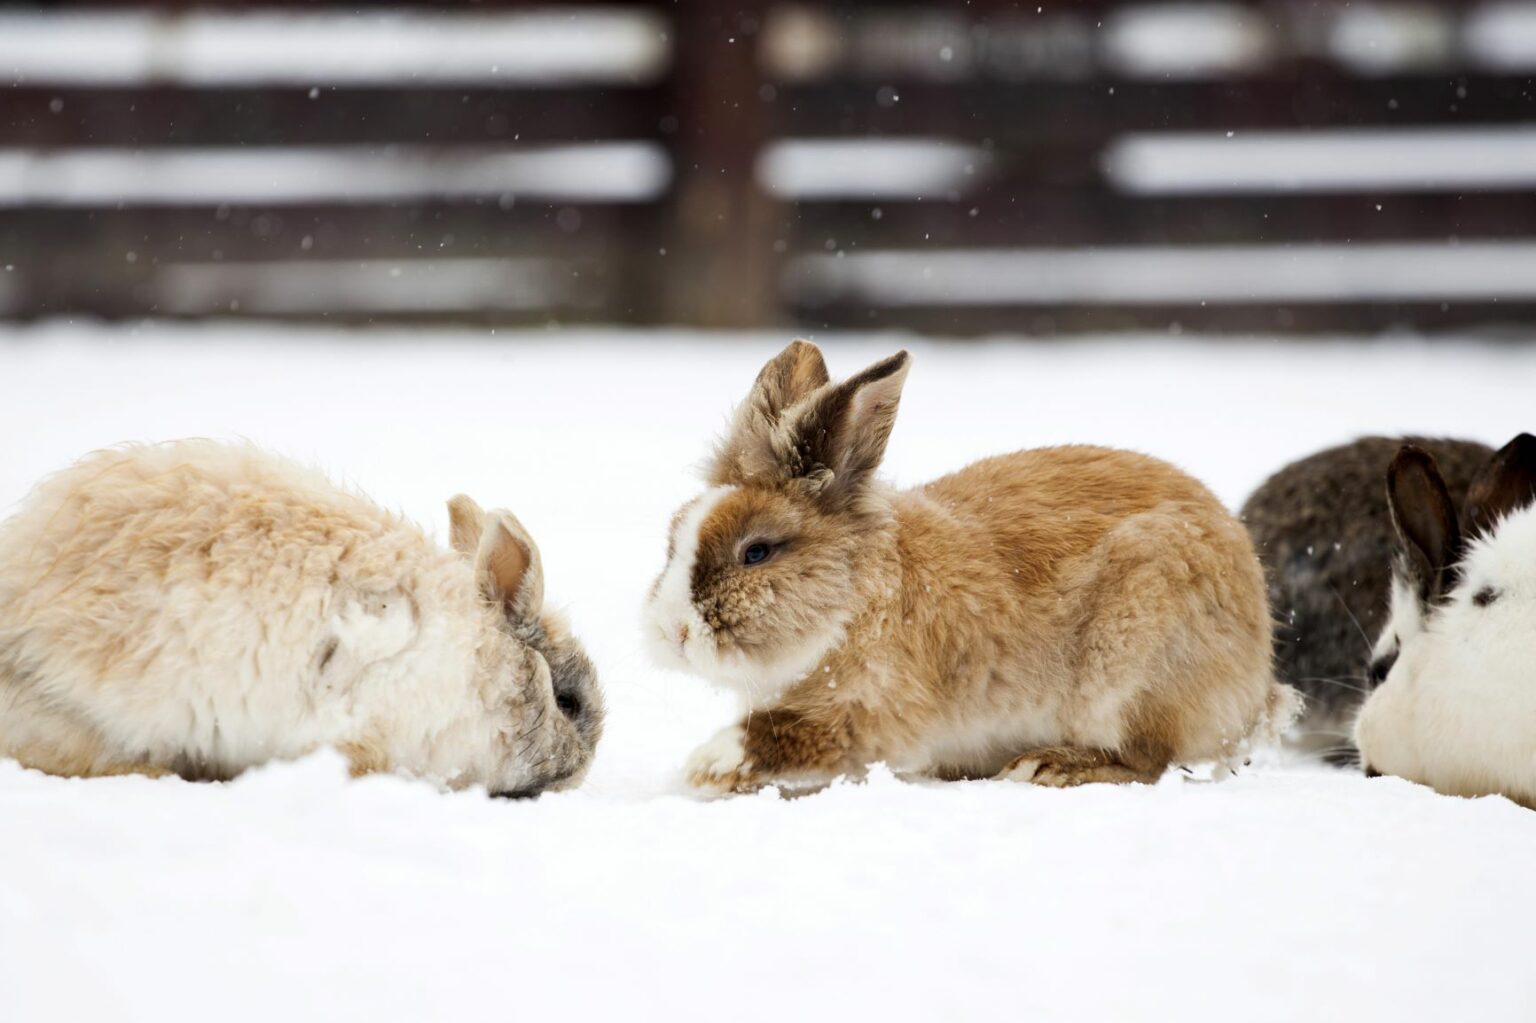 Three rabbits playing outdoors in the snow.